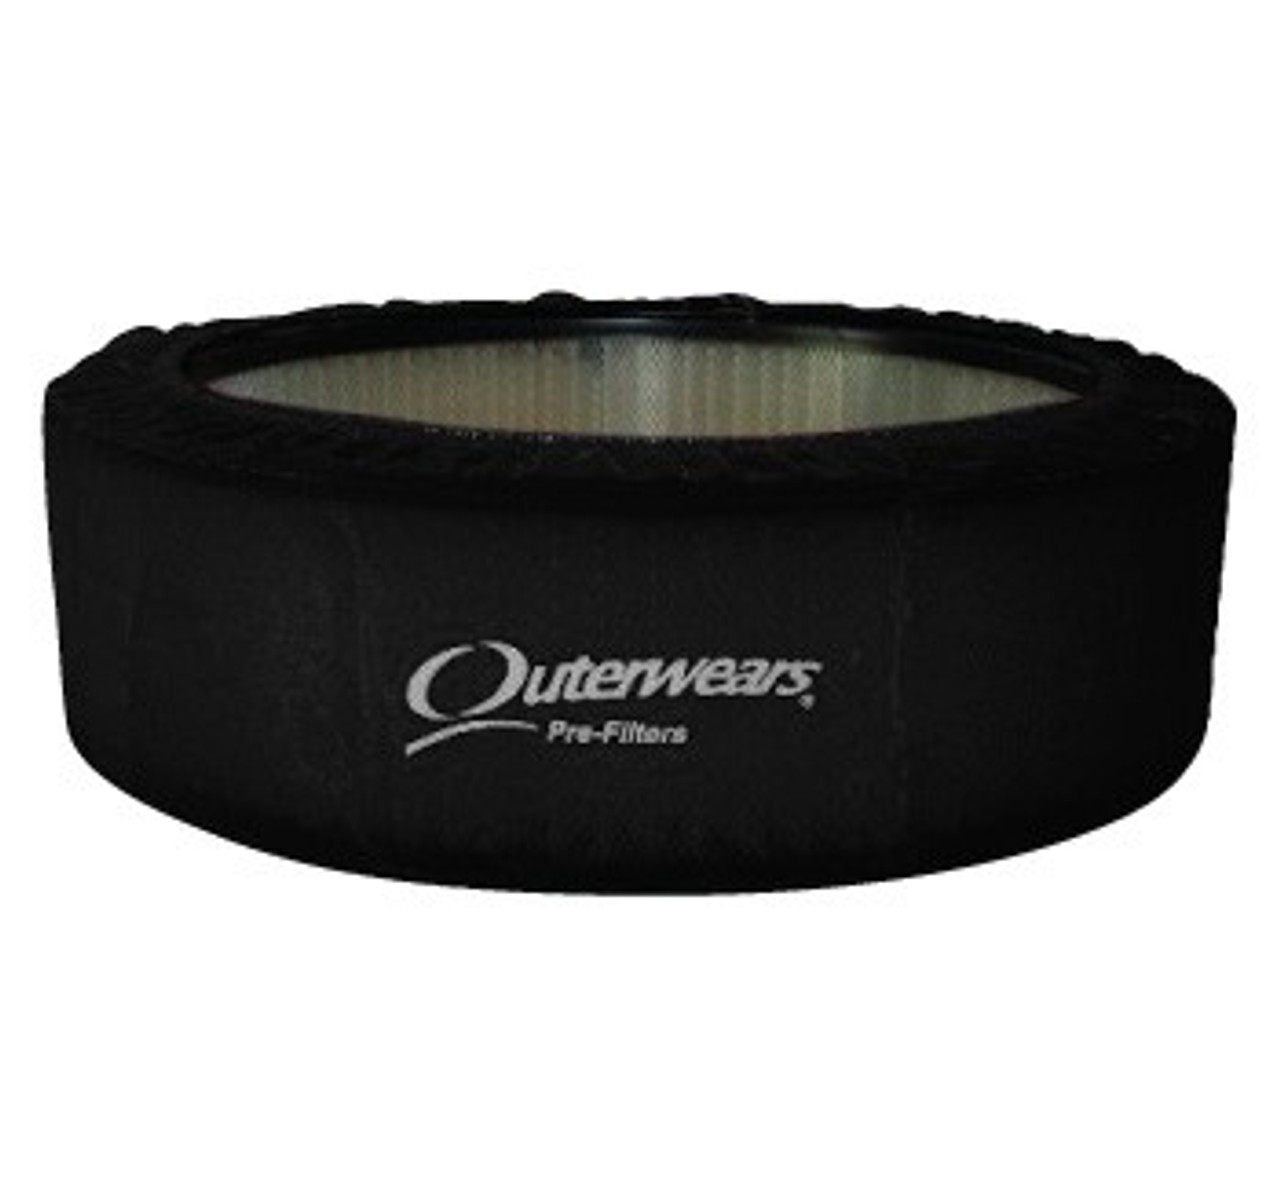 Outerwear Pre-Filter Air Cleaner Cover 14 x 4